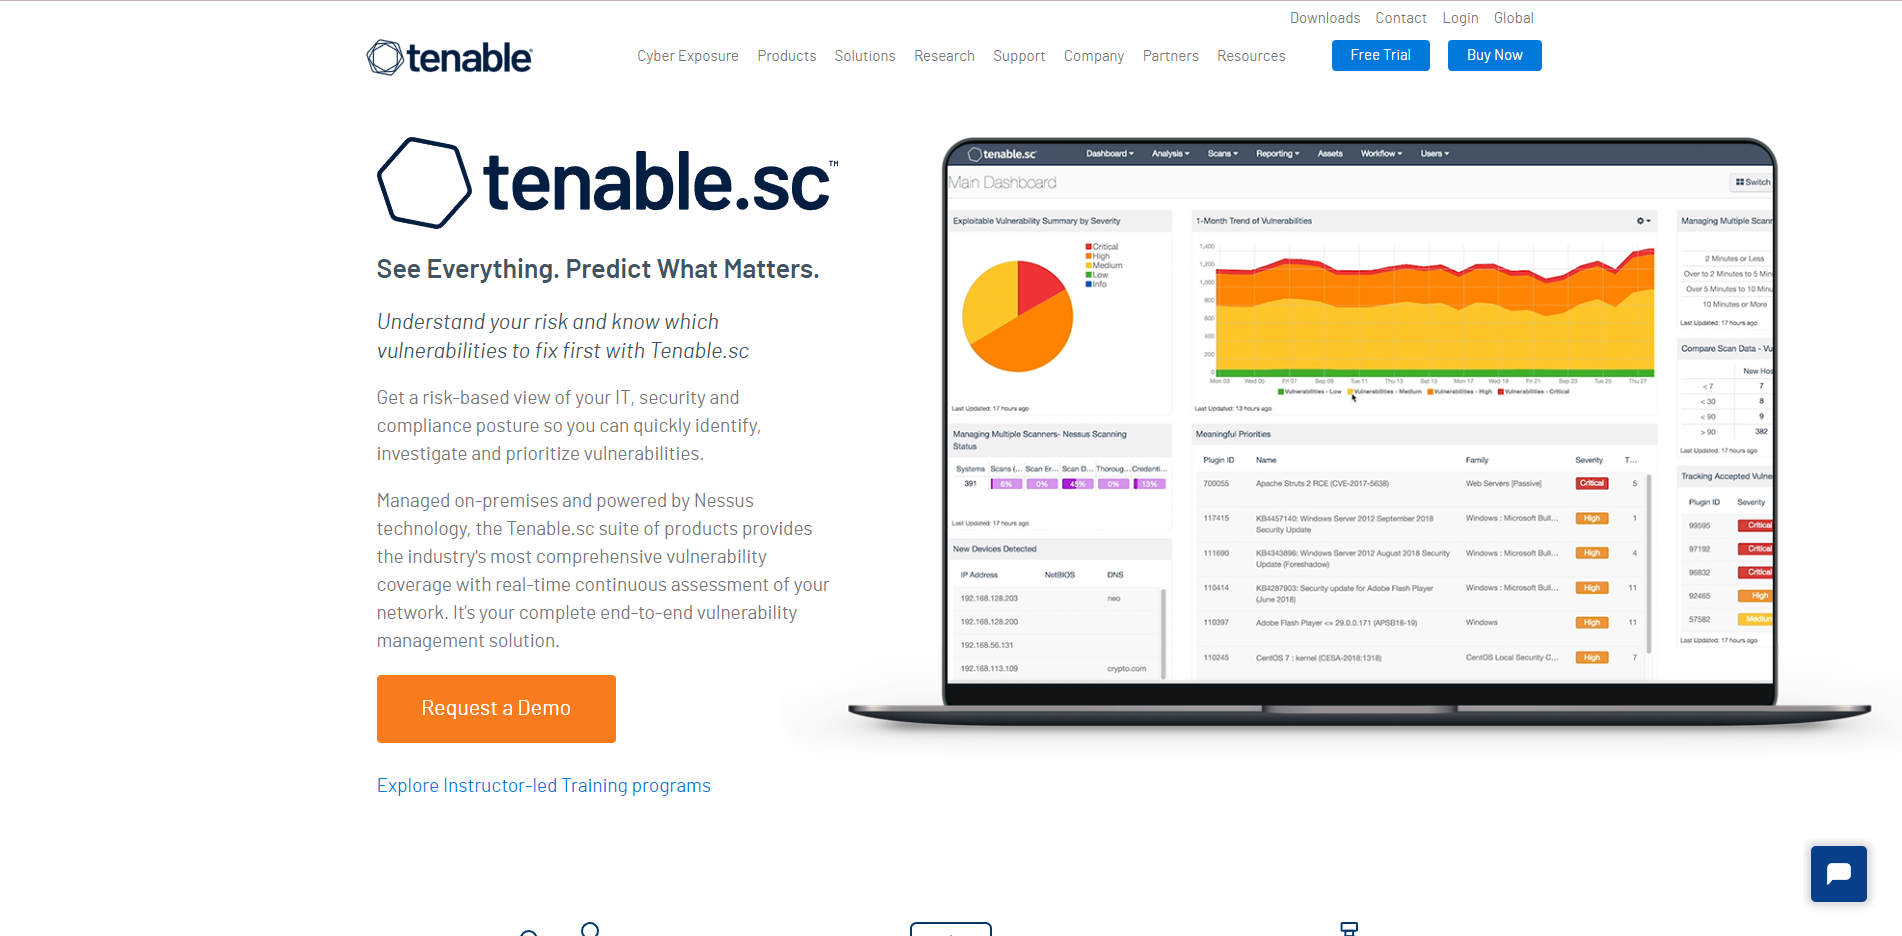 Tenable product / service